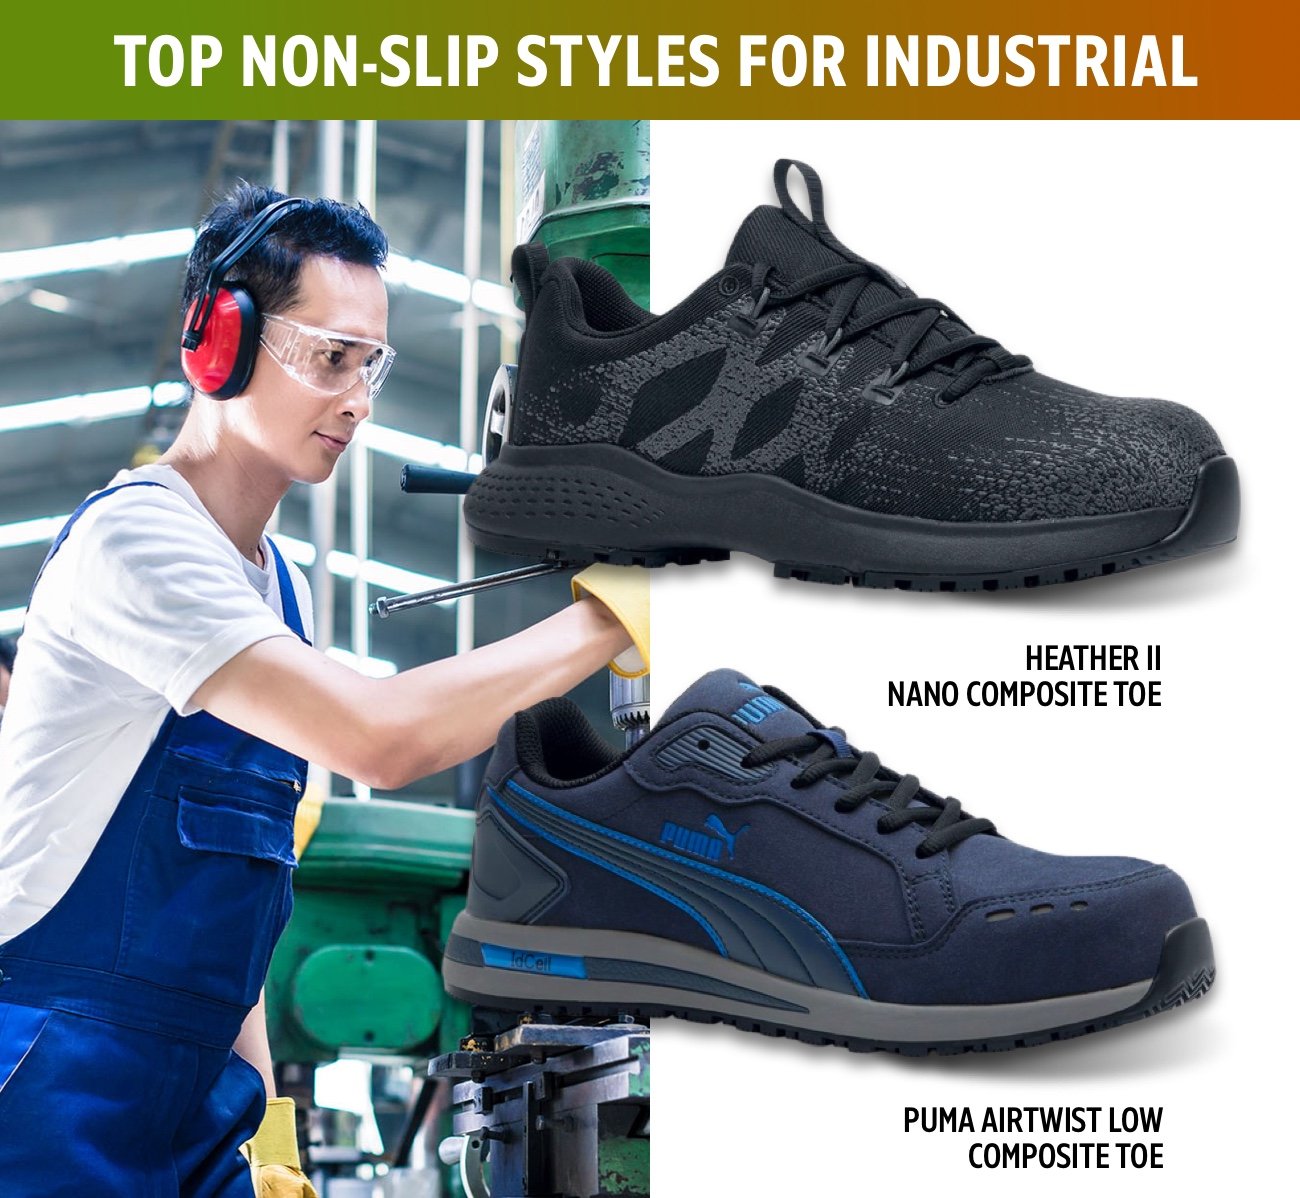 Top non-slip styles for Industrial